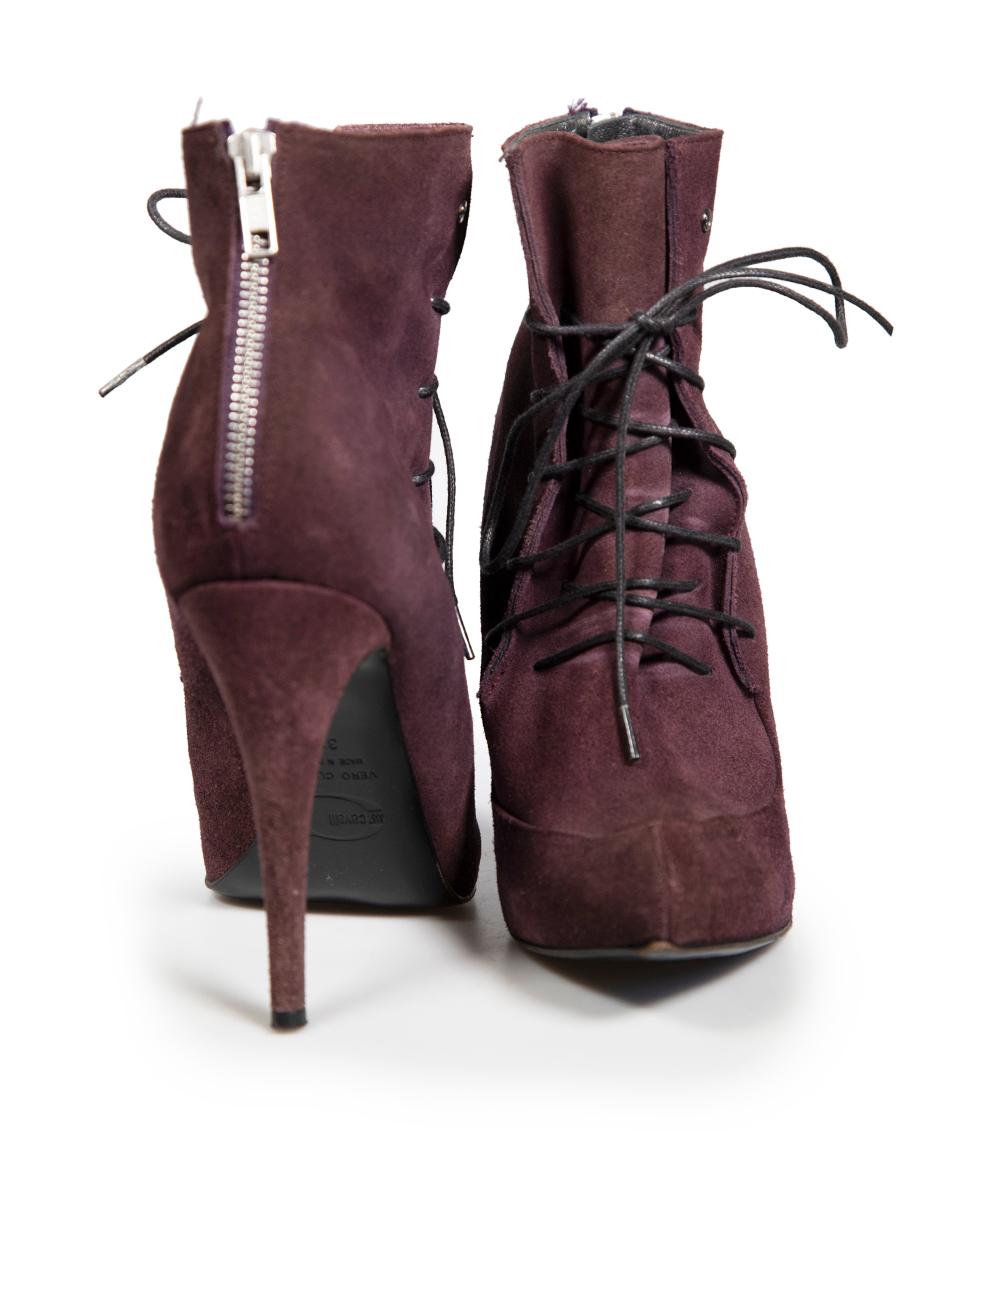 Roberto Cavalli Purple Suede Lace Up Ankle Boots Size IT 39 In Good Condition For Sale In London, GB